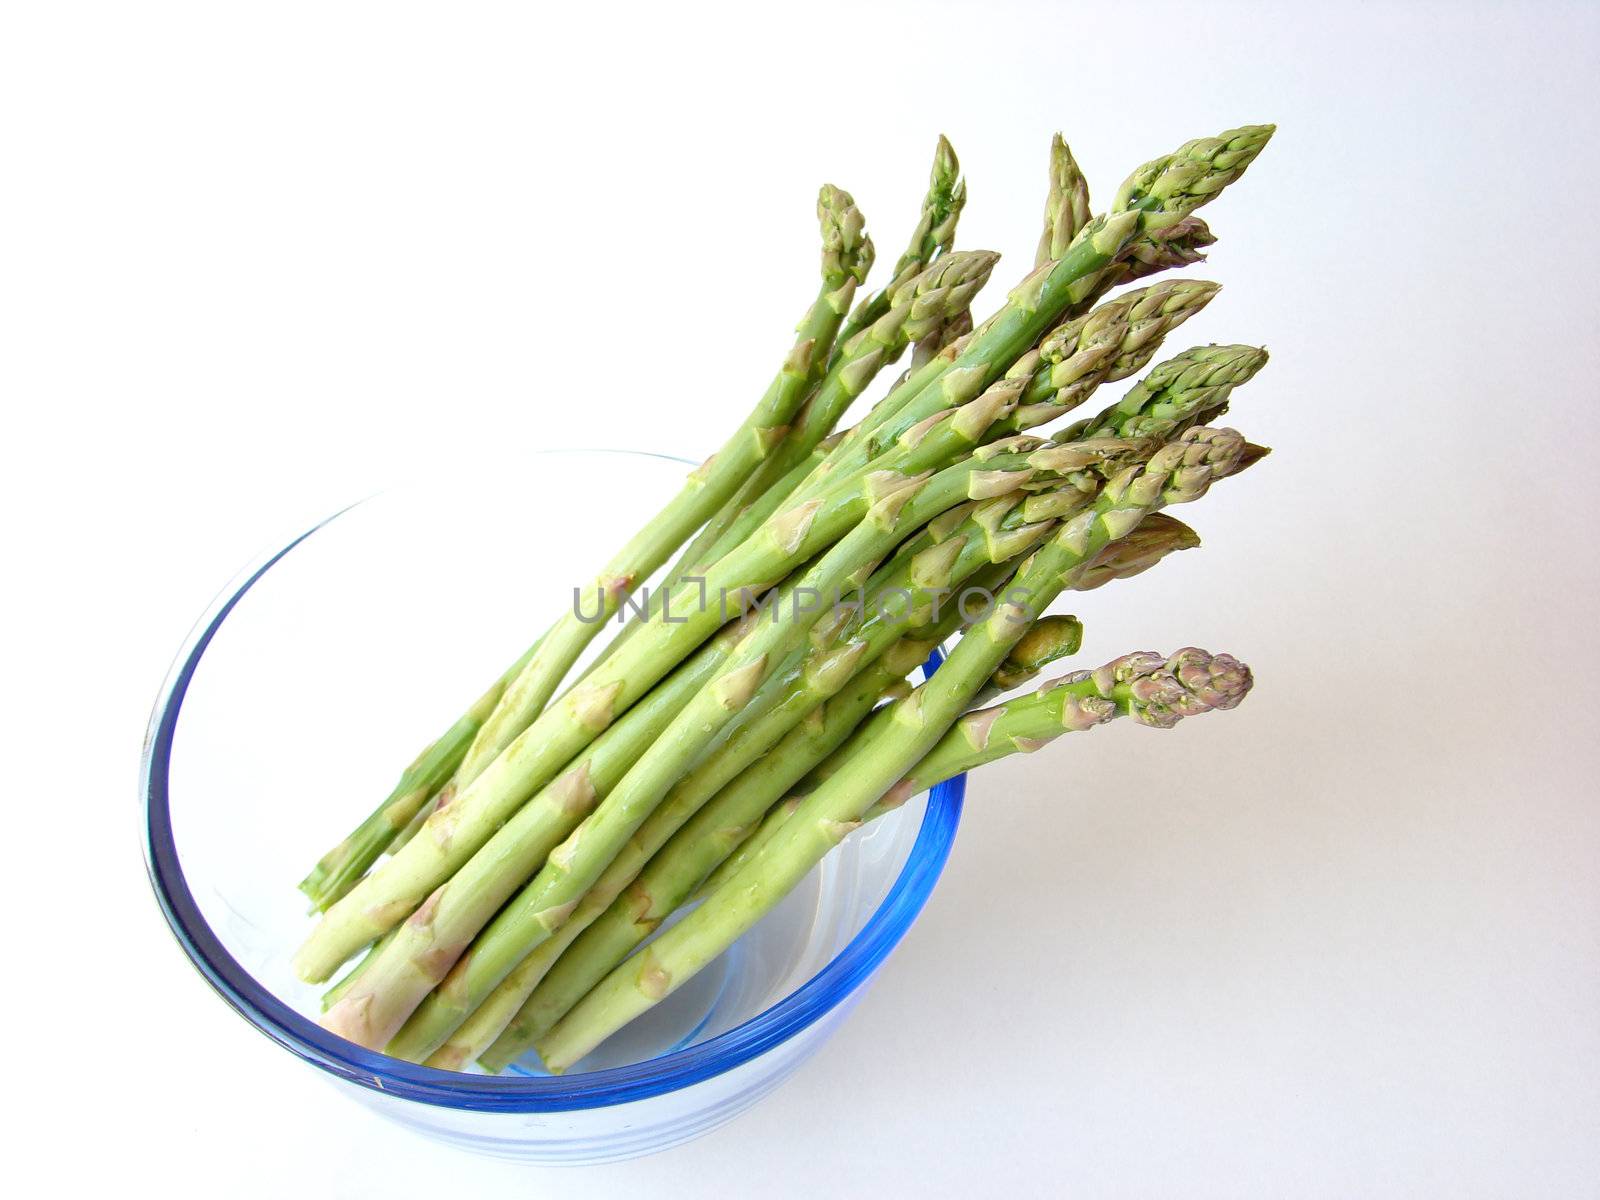 Bunch of asparagus by Flaps